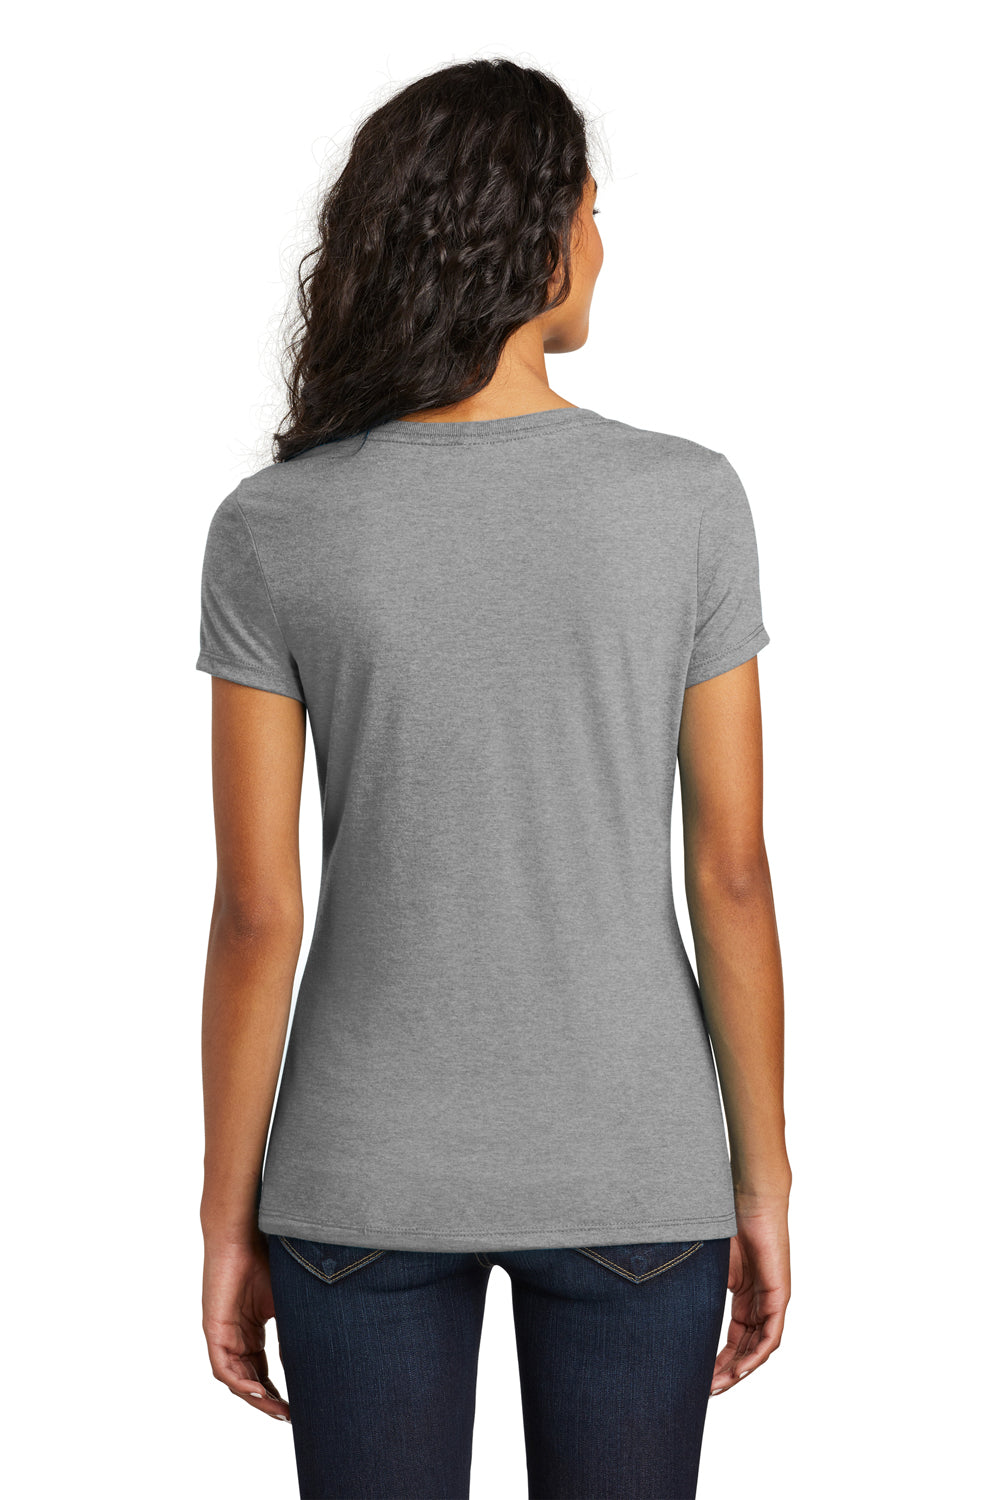 District DM1350L Womens Perfect Tri Short Sleeve V-Neck T-Shirt Grey Frost Back